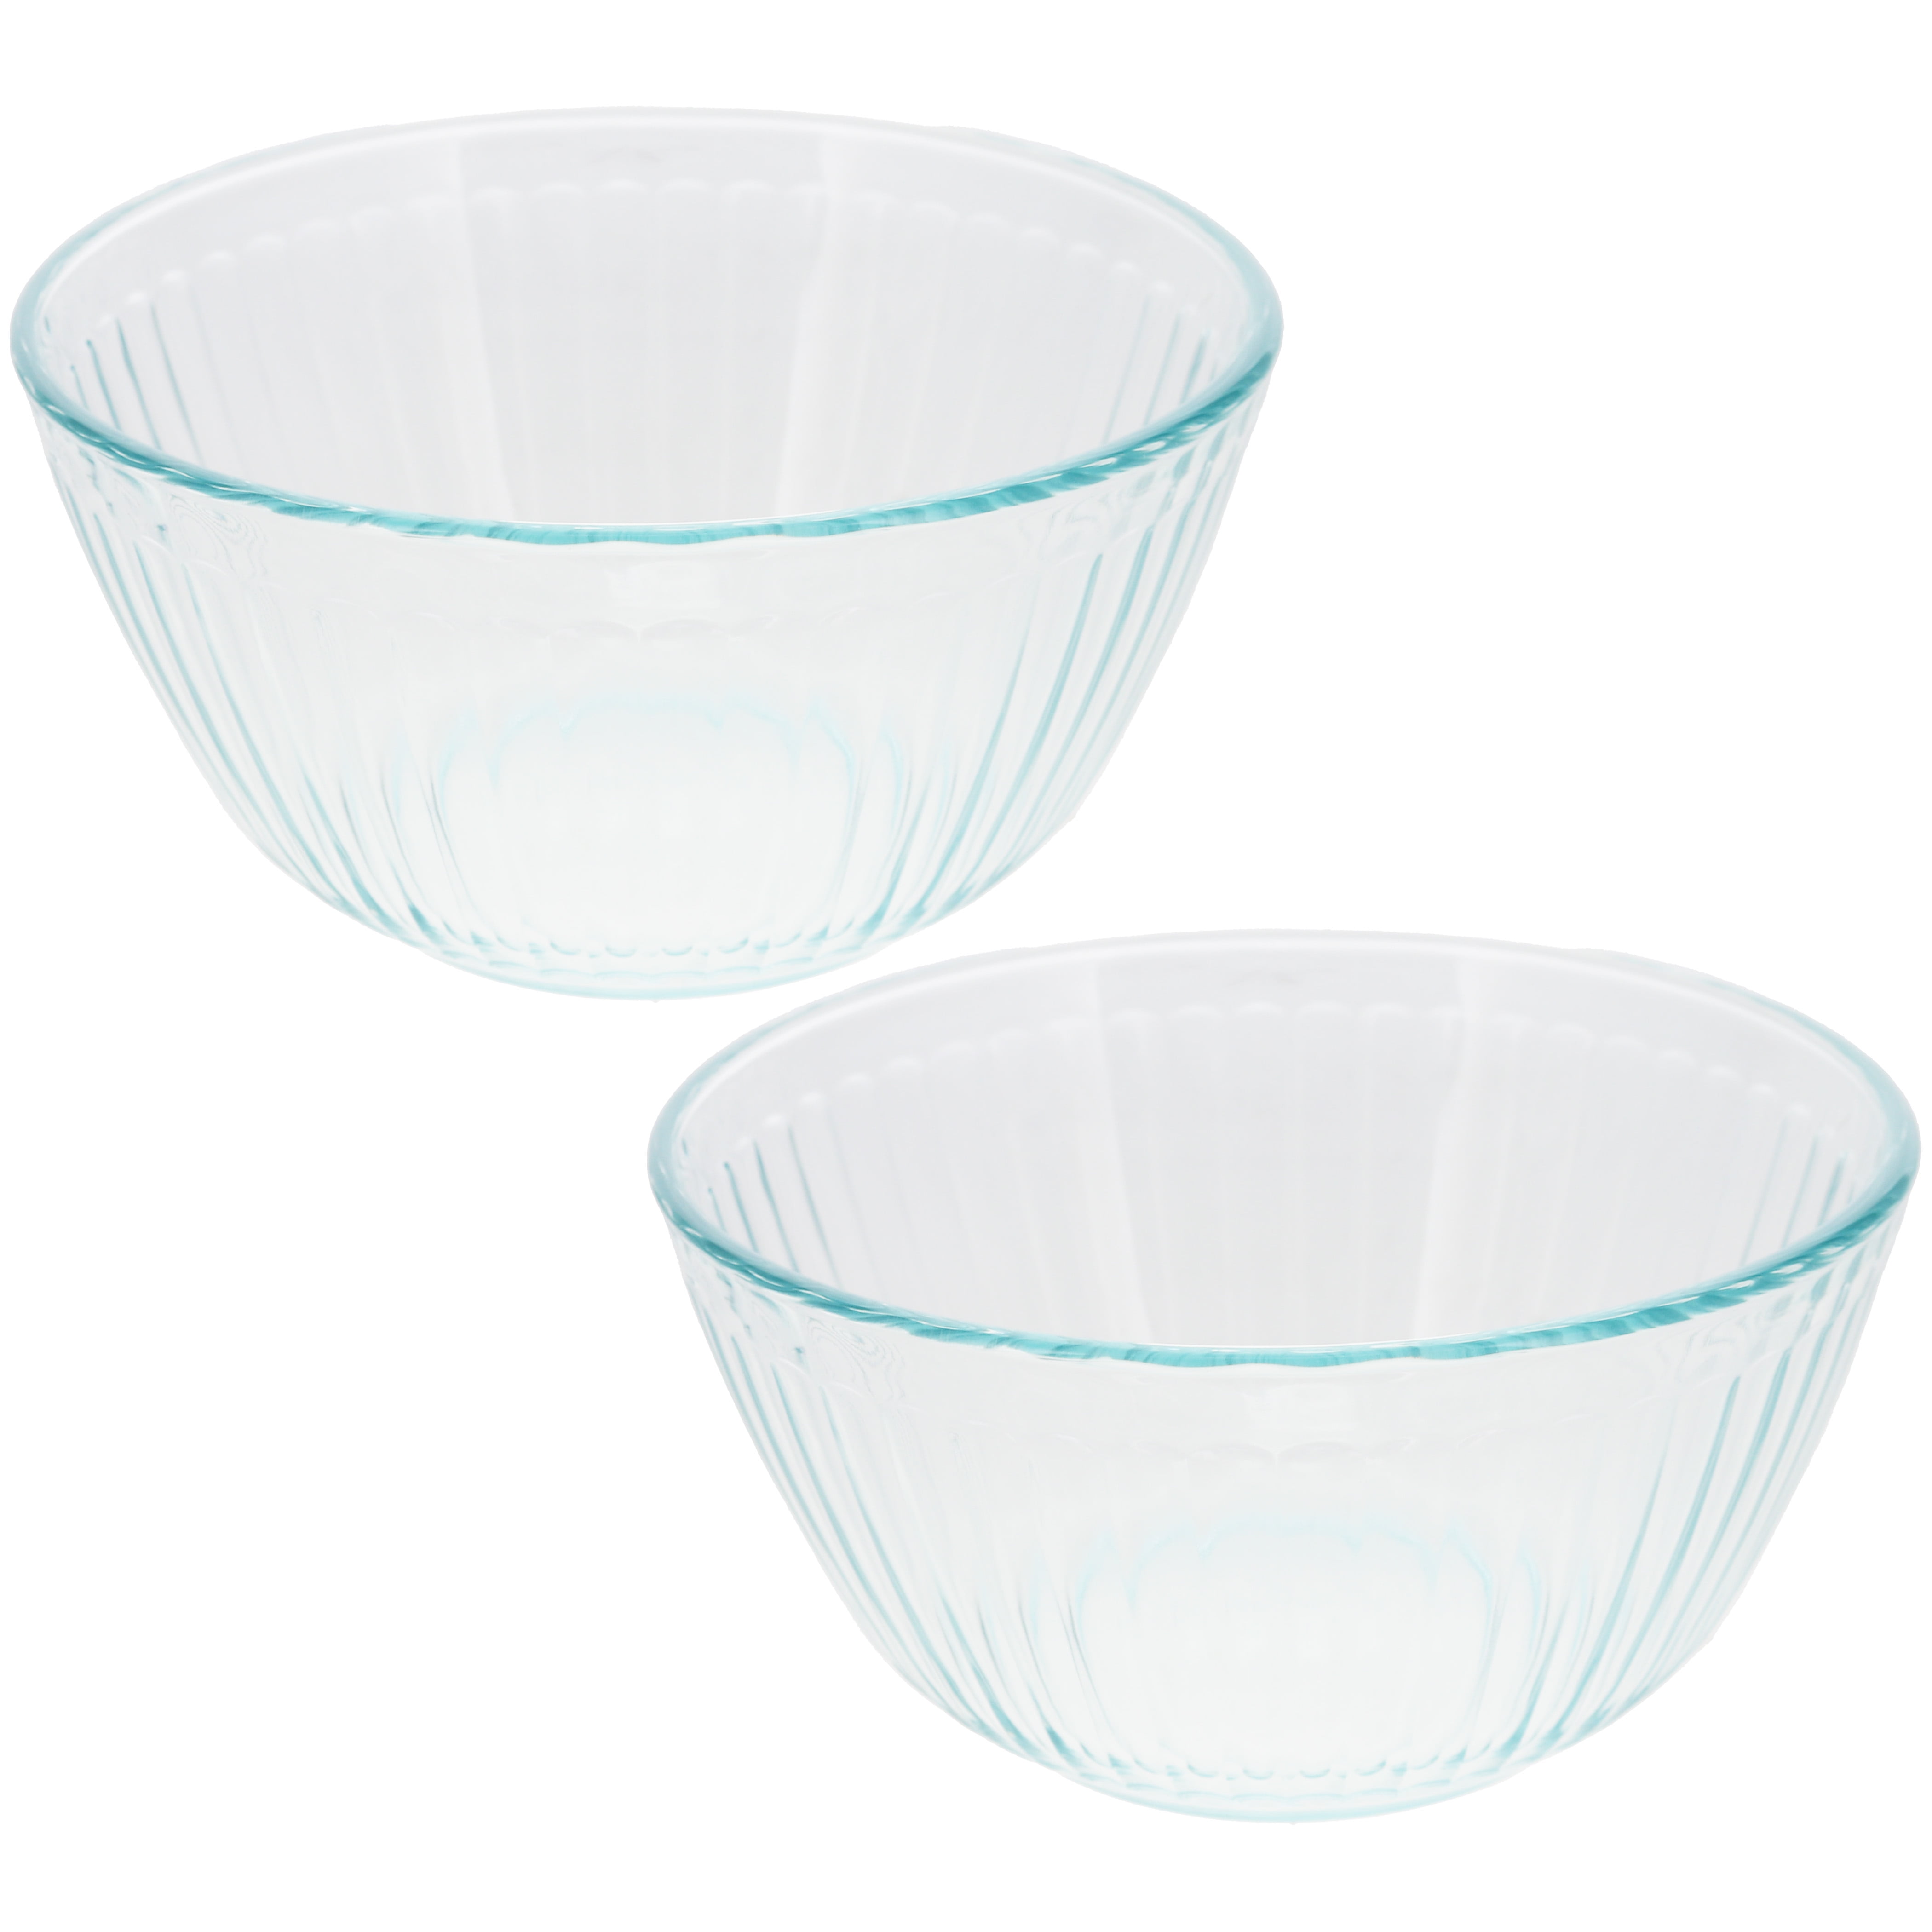 Pyrex Measuring Cup And Mixing Bowls Stock Photo - Download Image